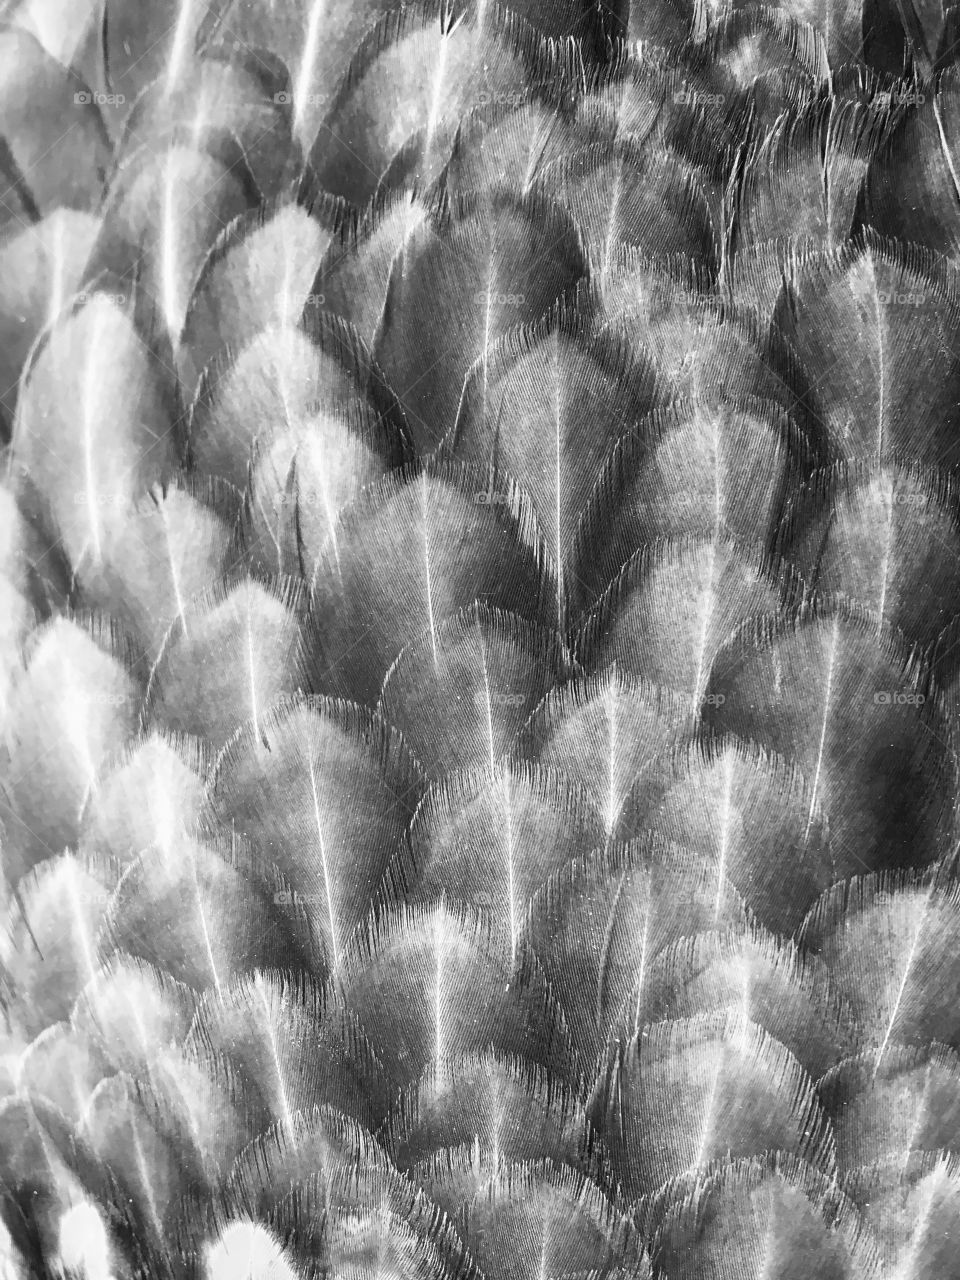 Hen feathers close-up in B&W